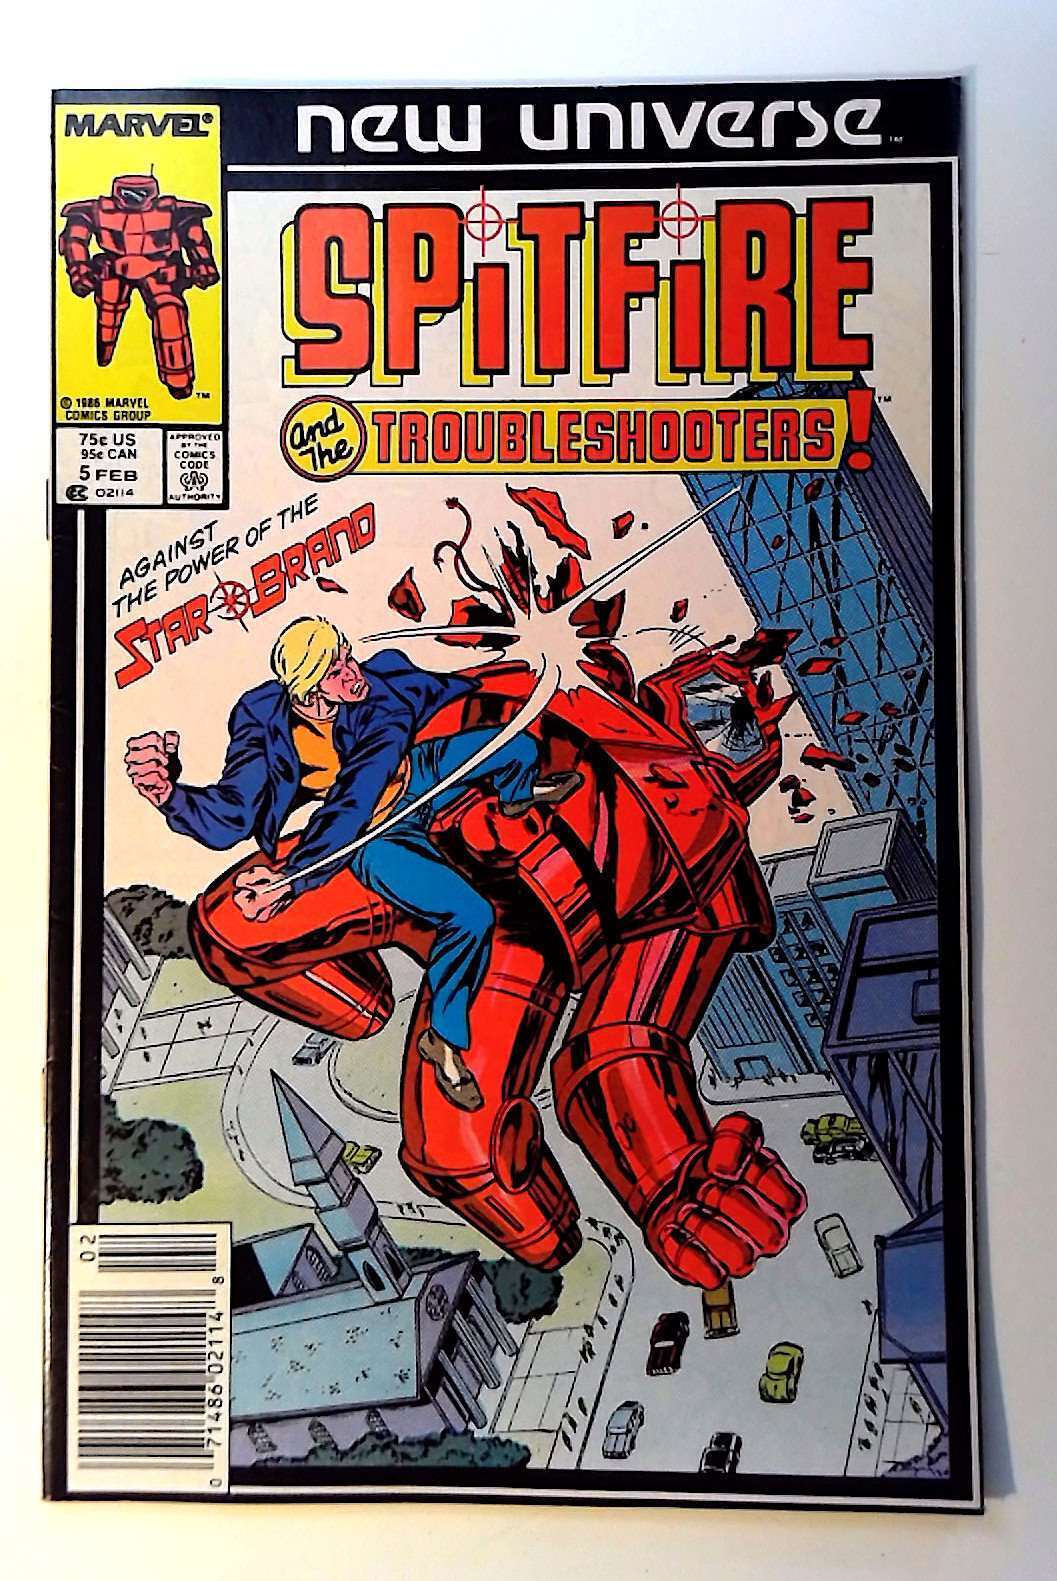 Spitfire and the Troubleshooters #5 Marvel (1987) New Universe Comic Book